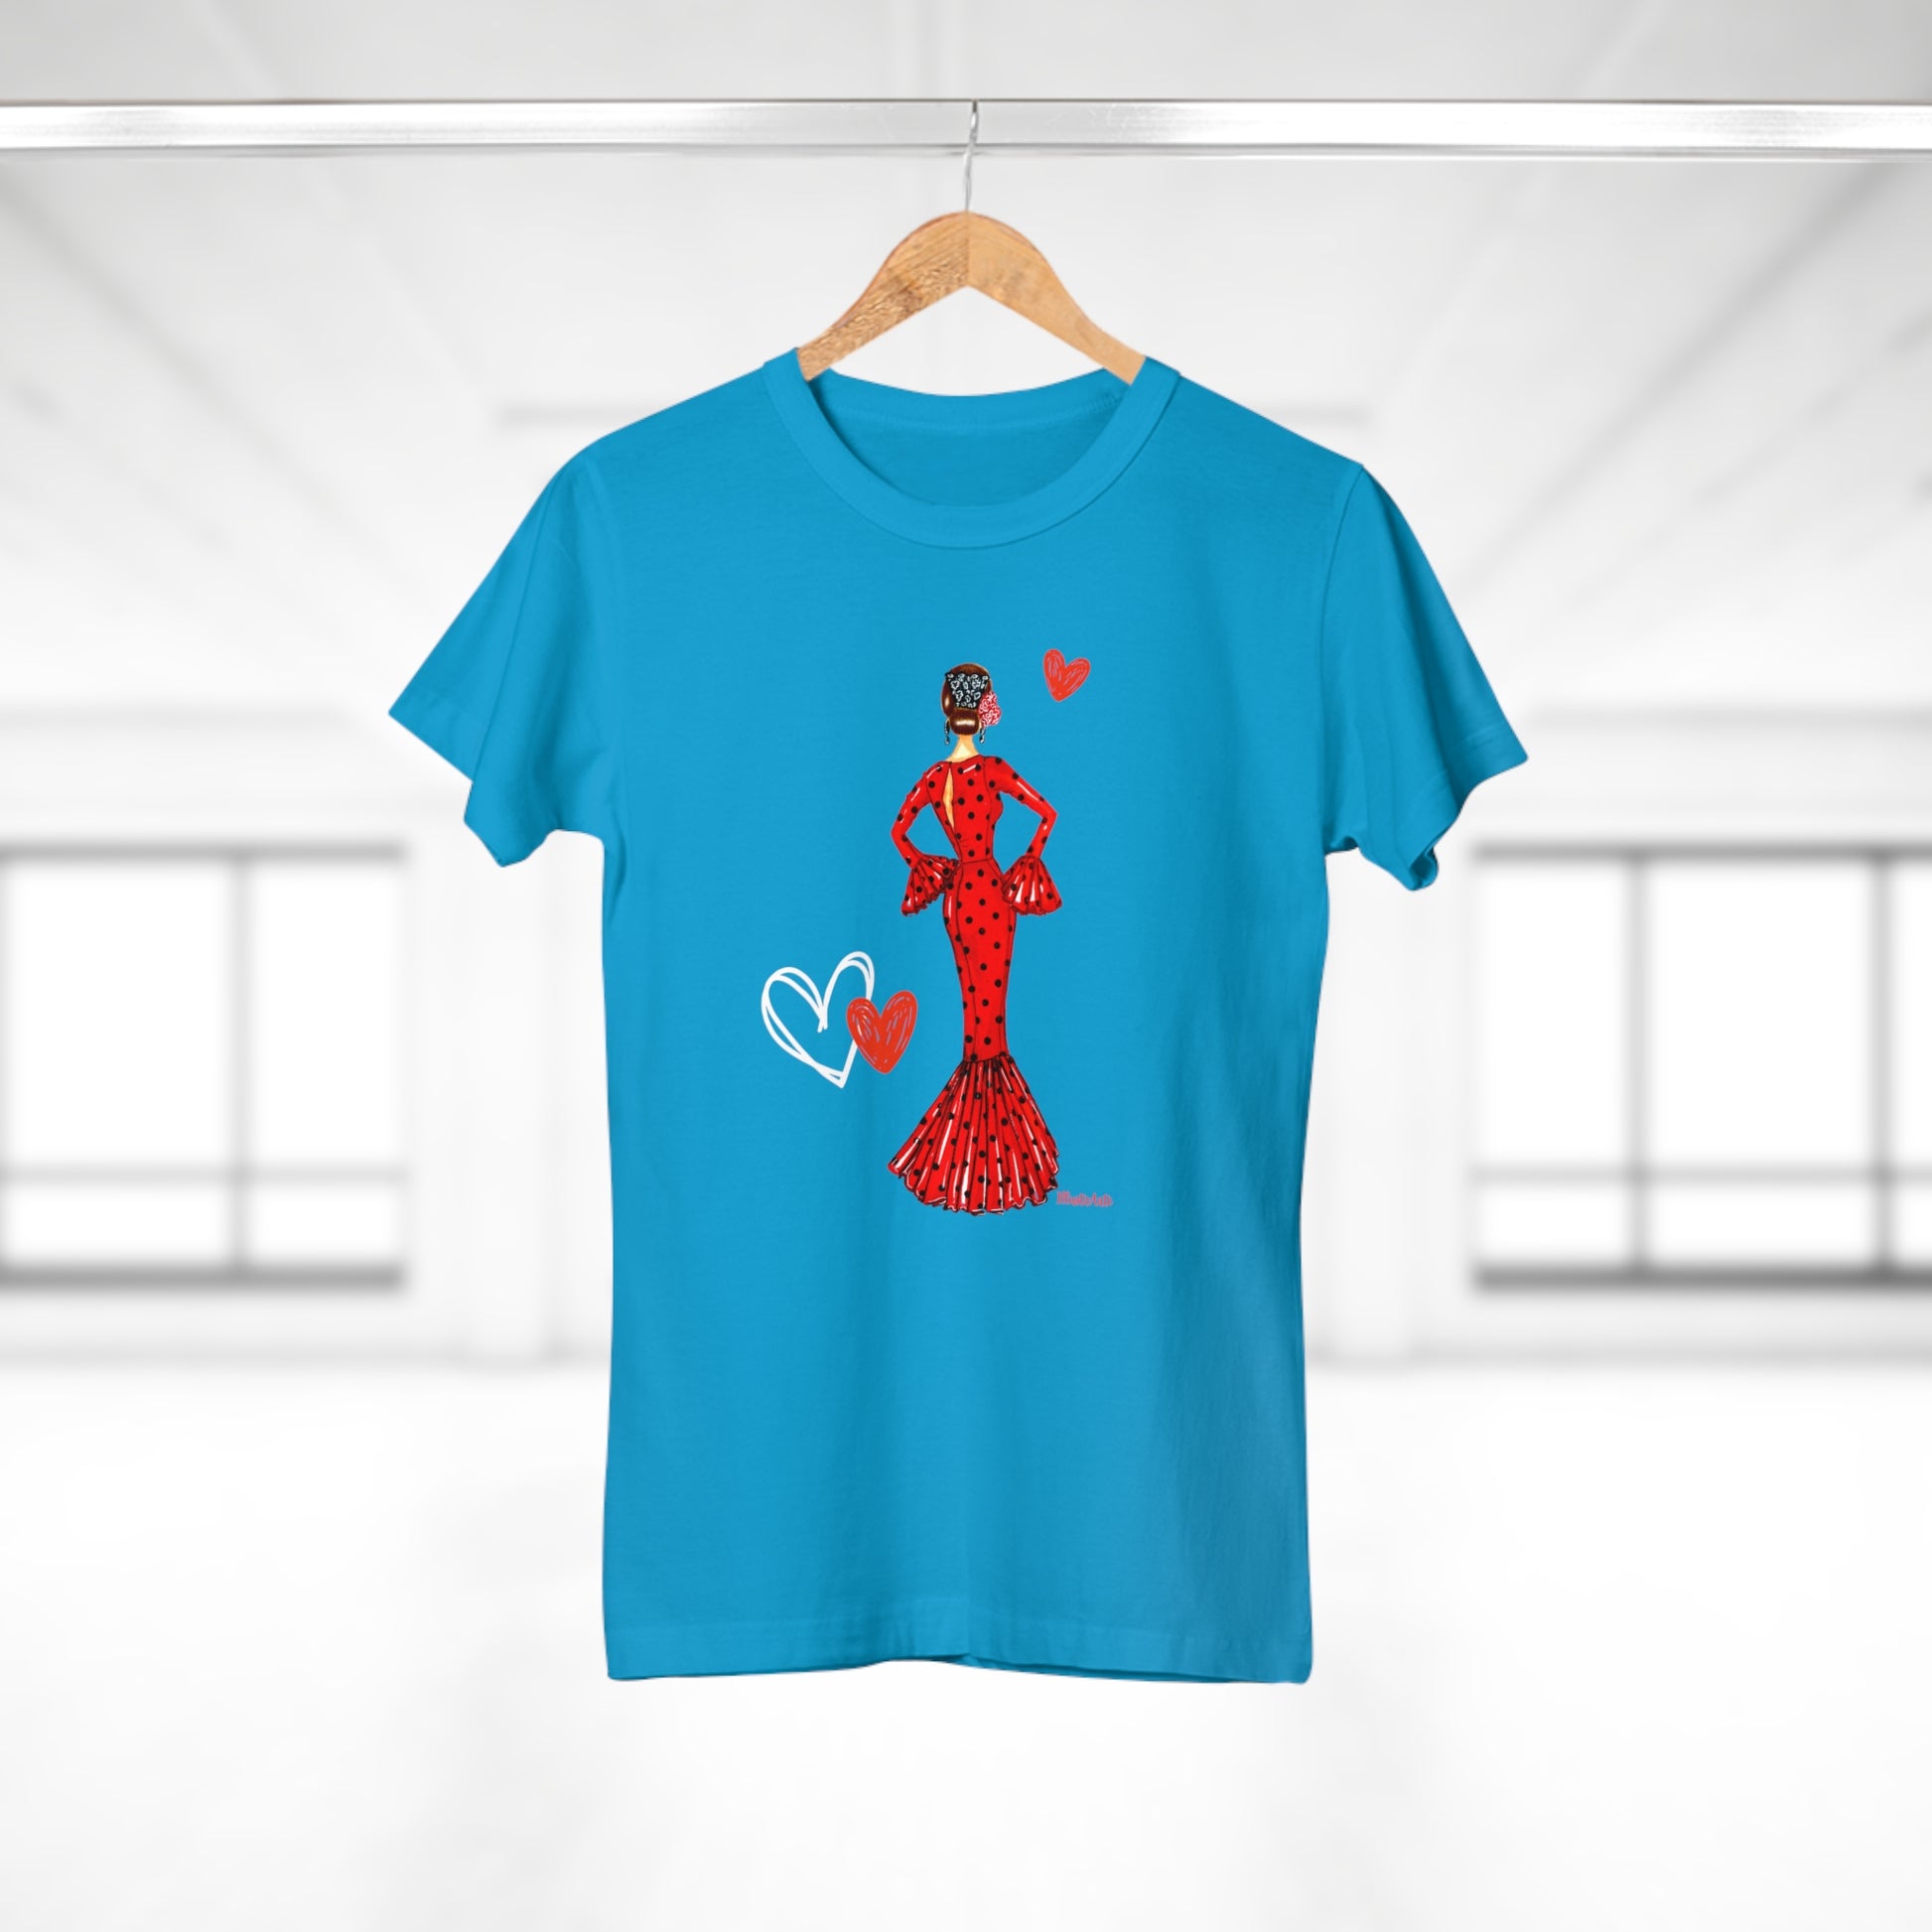 a blue t - shirt with a woman in a red dress holding a heart